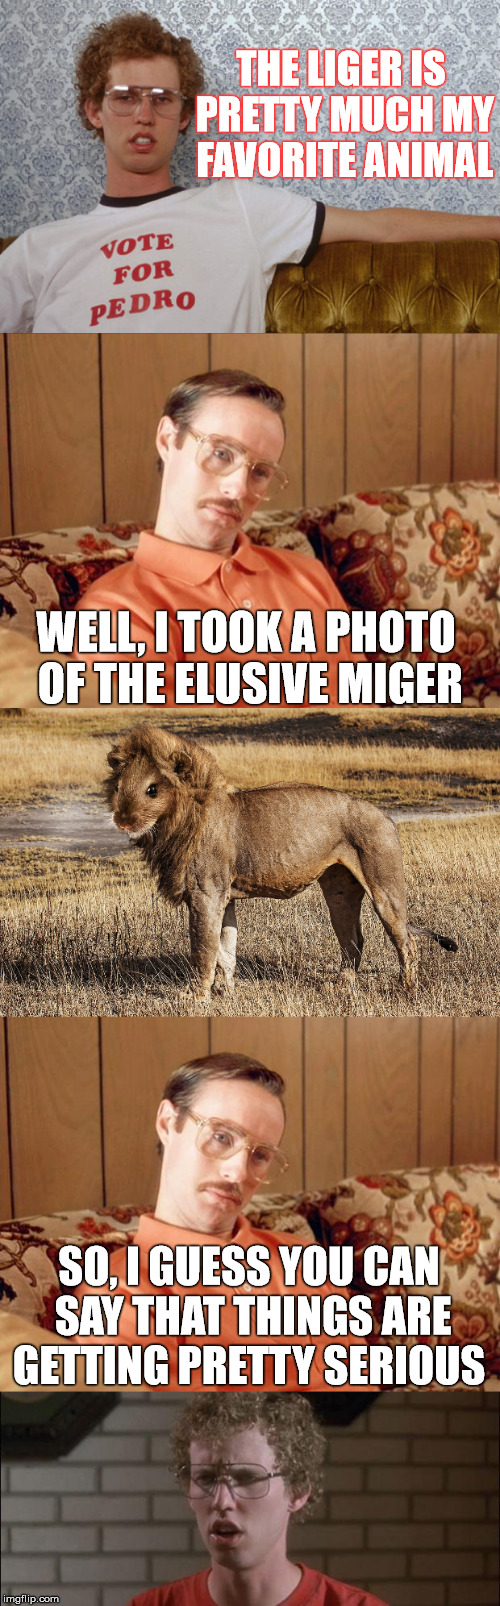 Vote for Miger  | THE LIGER IS PRETTY MUCH MY FAVORITE ANIMAL; WELL, I TOOK A PHOTO OF THE ELUSIVE MIGER; SO, I GUESS YOU CAN SAY THAT THINGS ARE GETTING PRETTY SERIOUS | image tagged in napolean dynamite,so i guess you can say things are getting pretty serious,liger,miger,meme | made w/ Imgflip meme maker